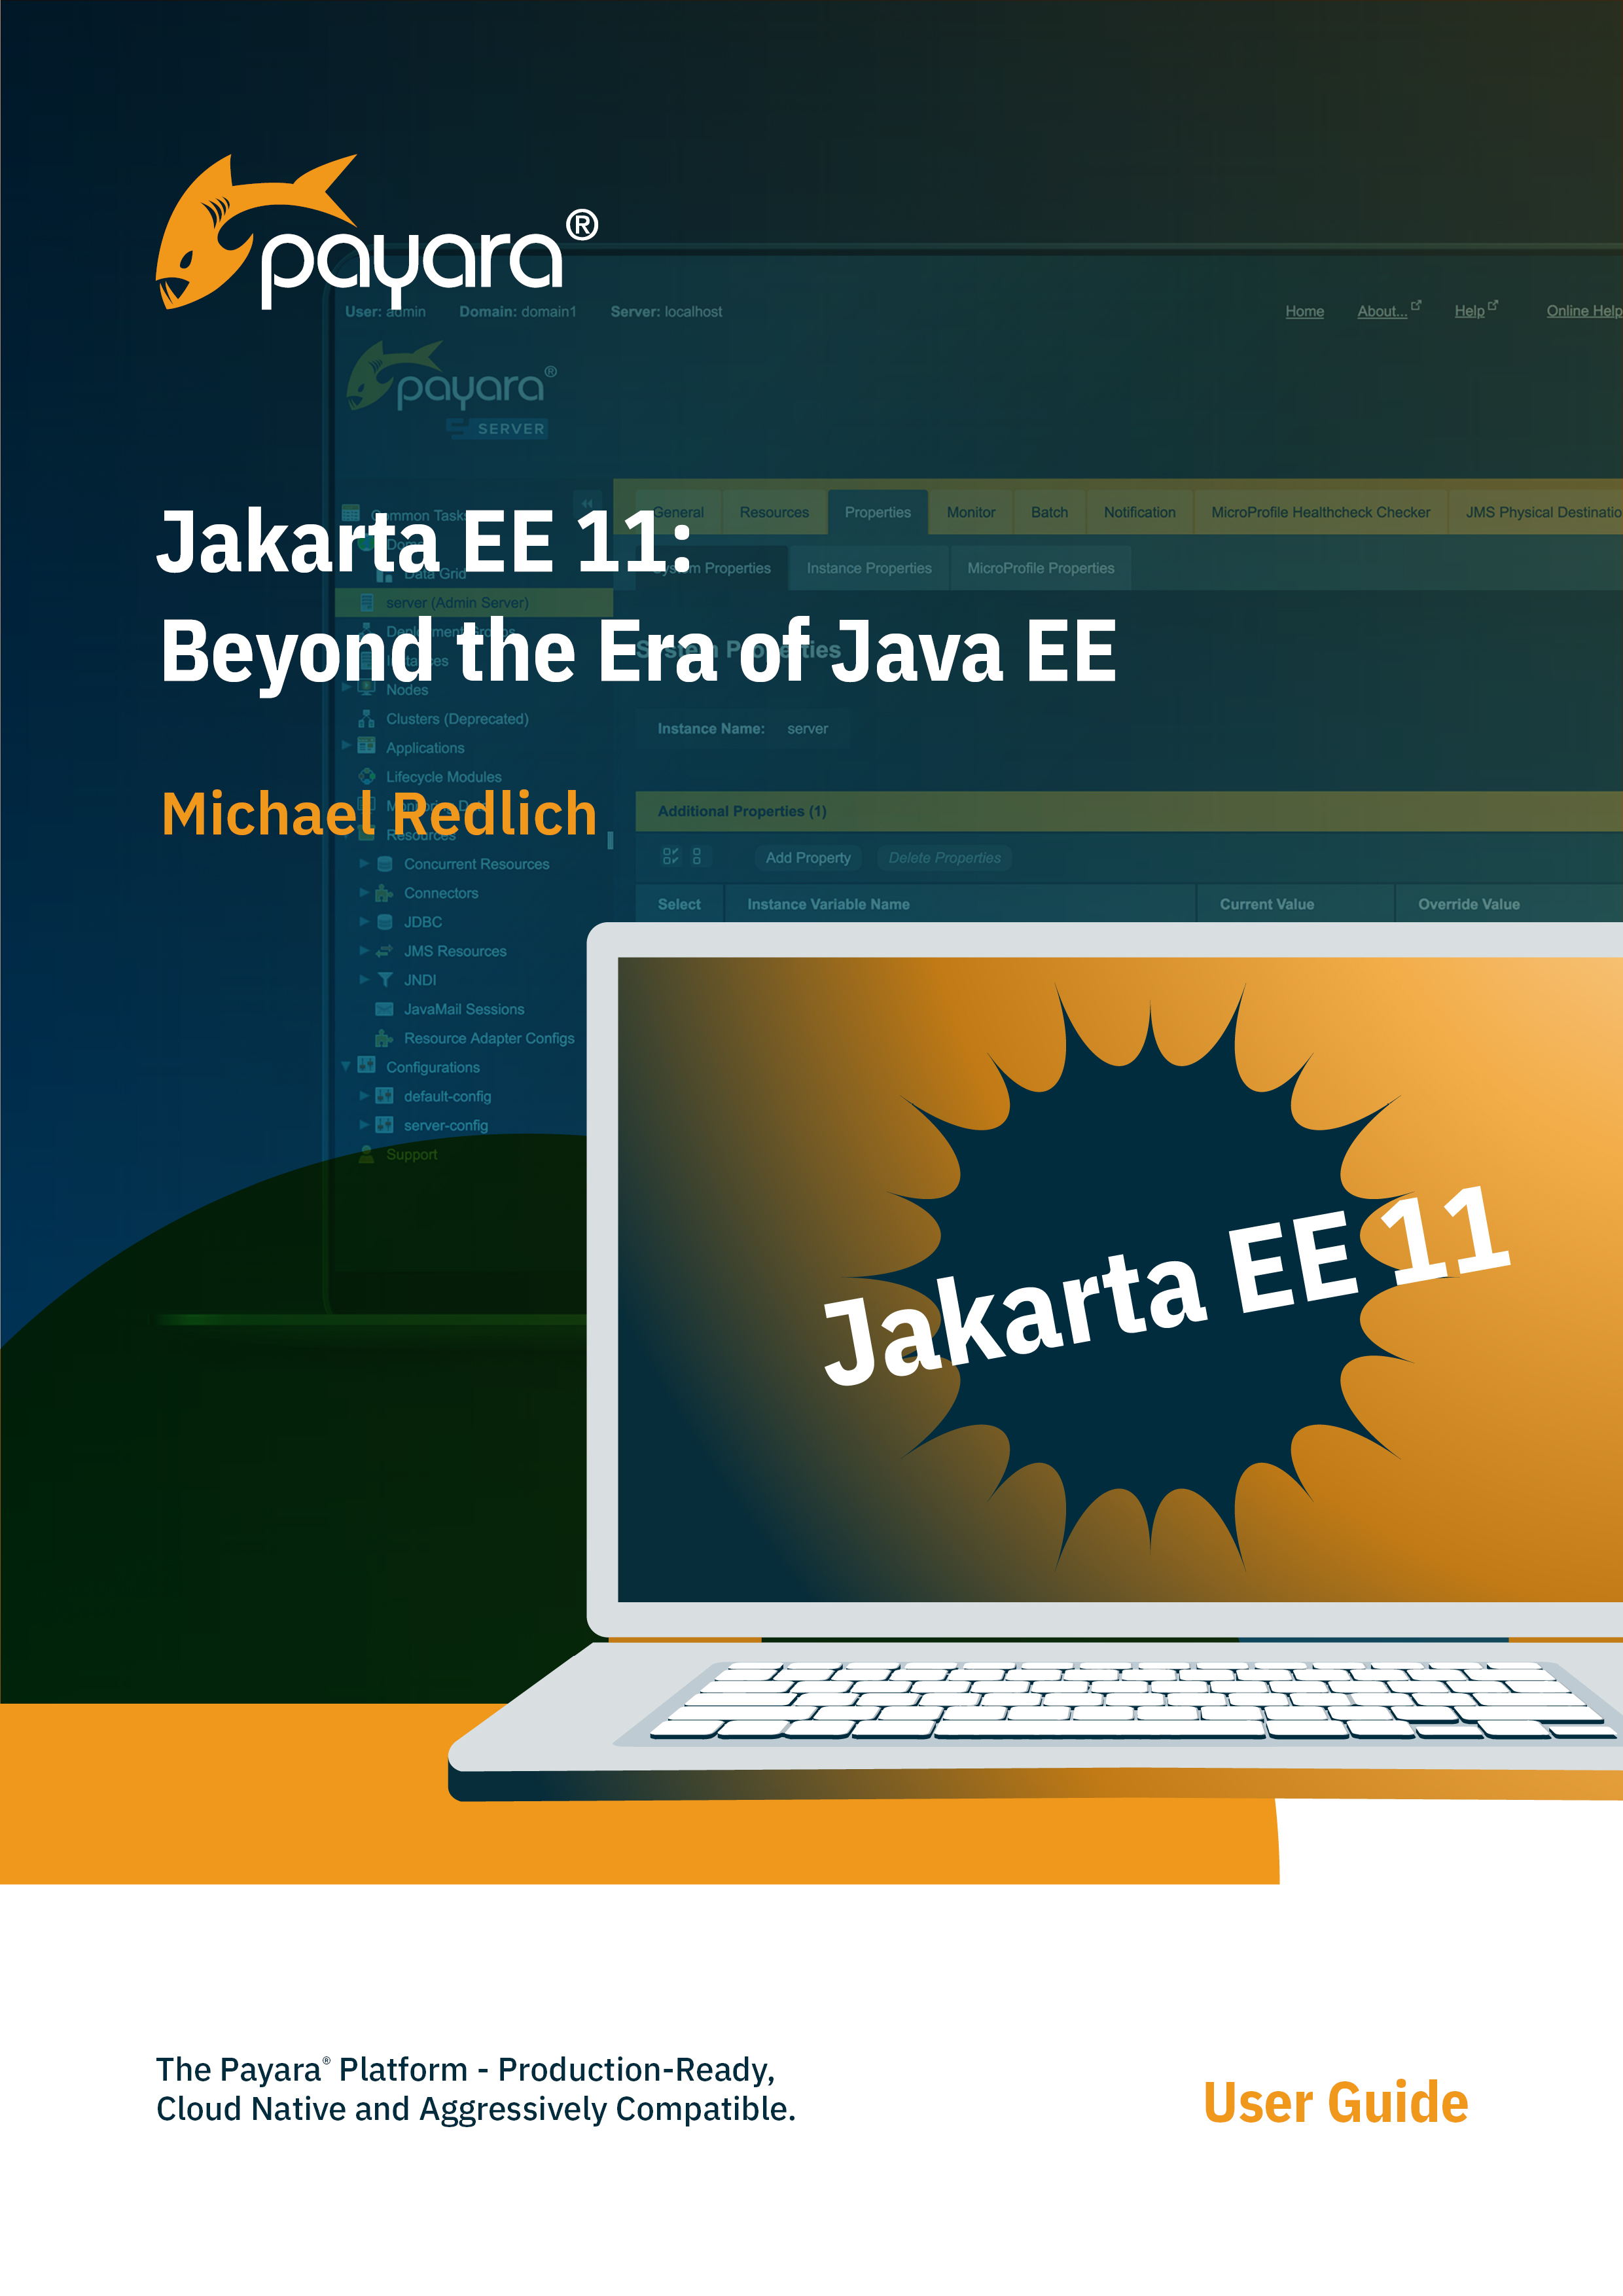 Cover image for akarta EE 11 Beyond the Era of Java EE